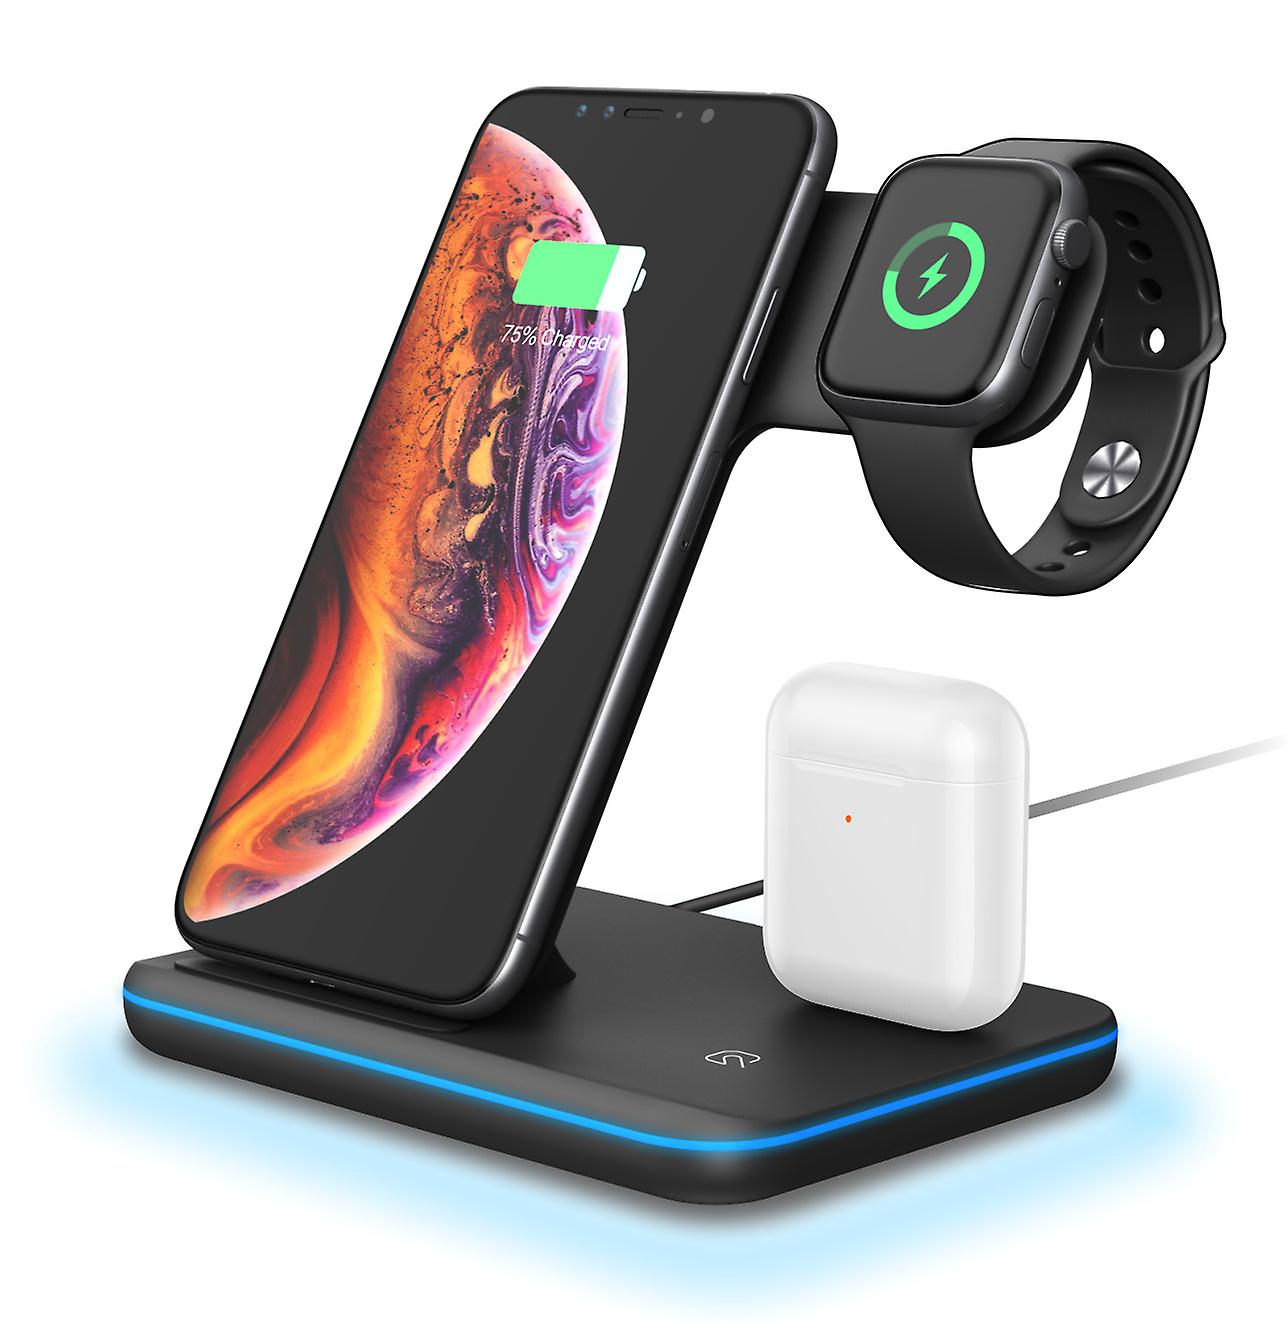 Grofia ™ 3 in 1 Wireless stand Charger